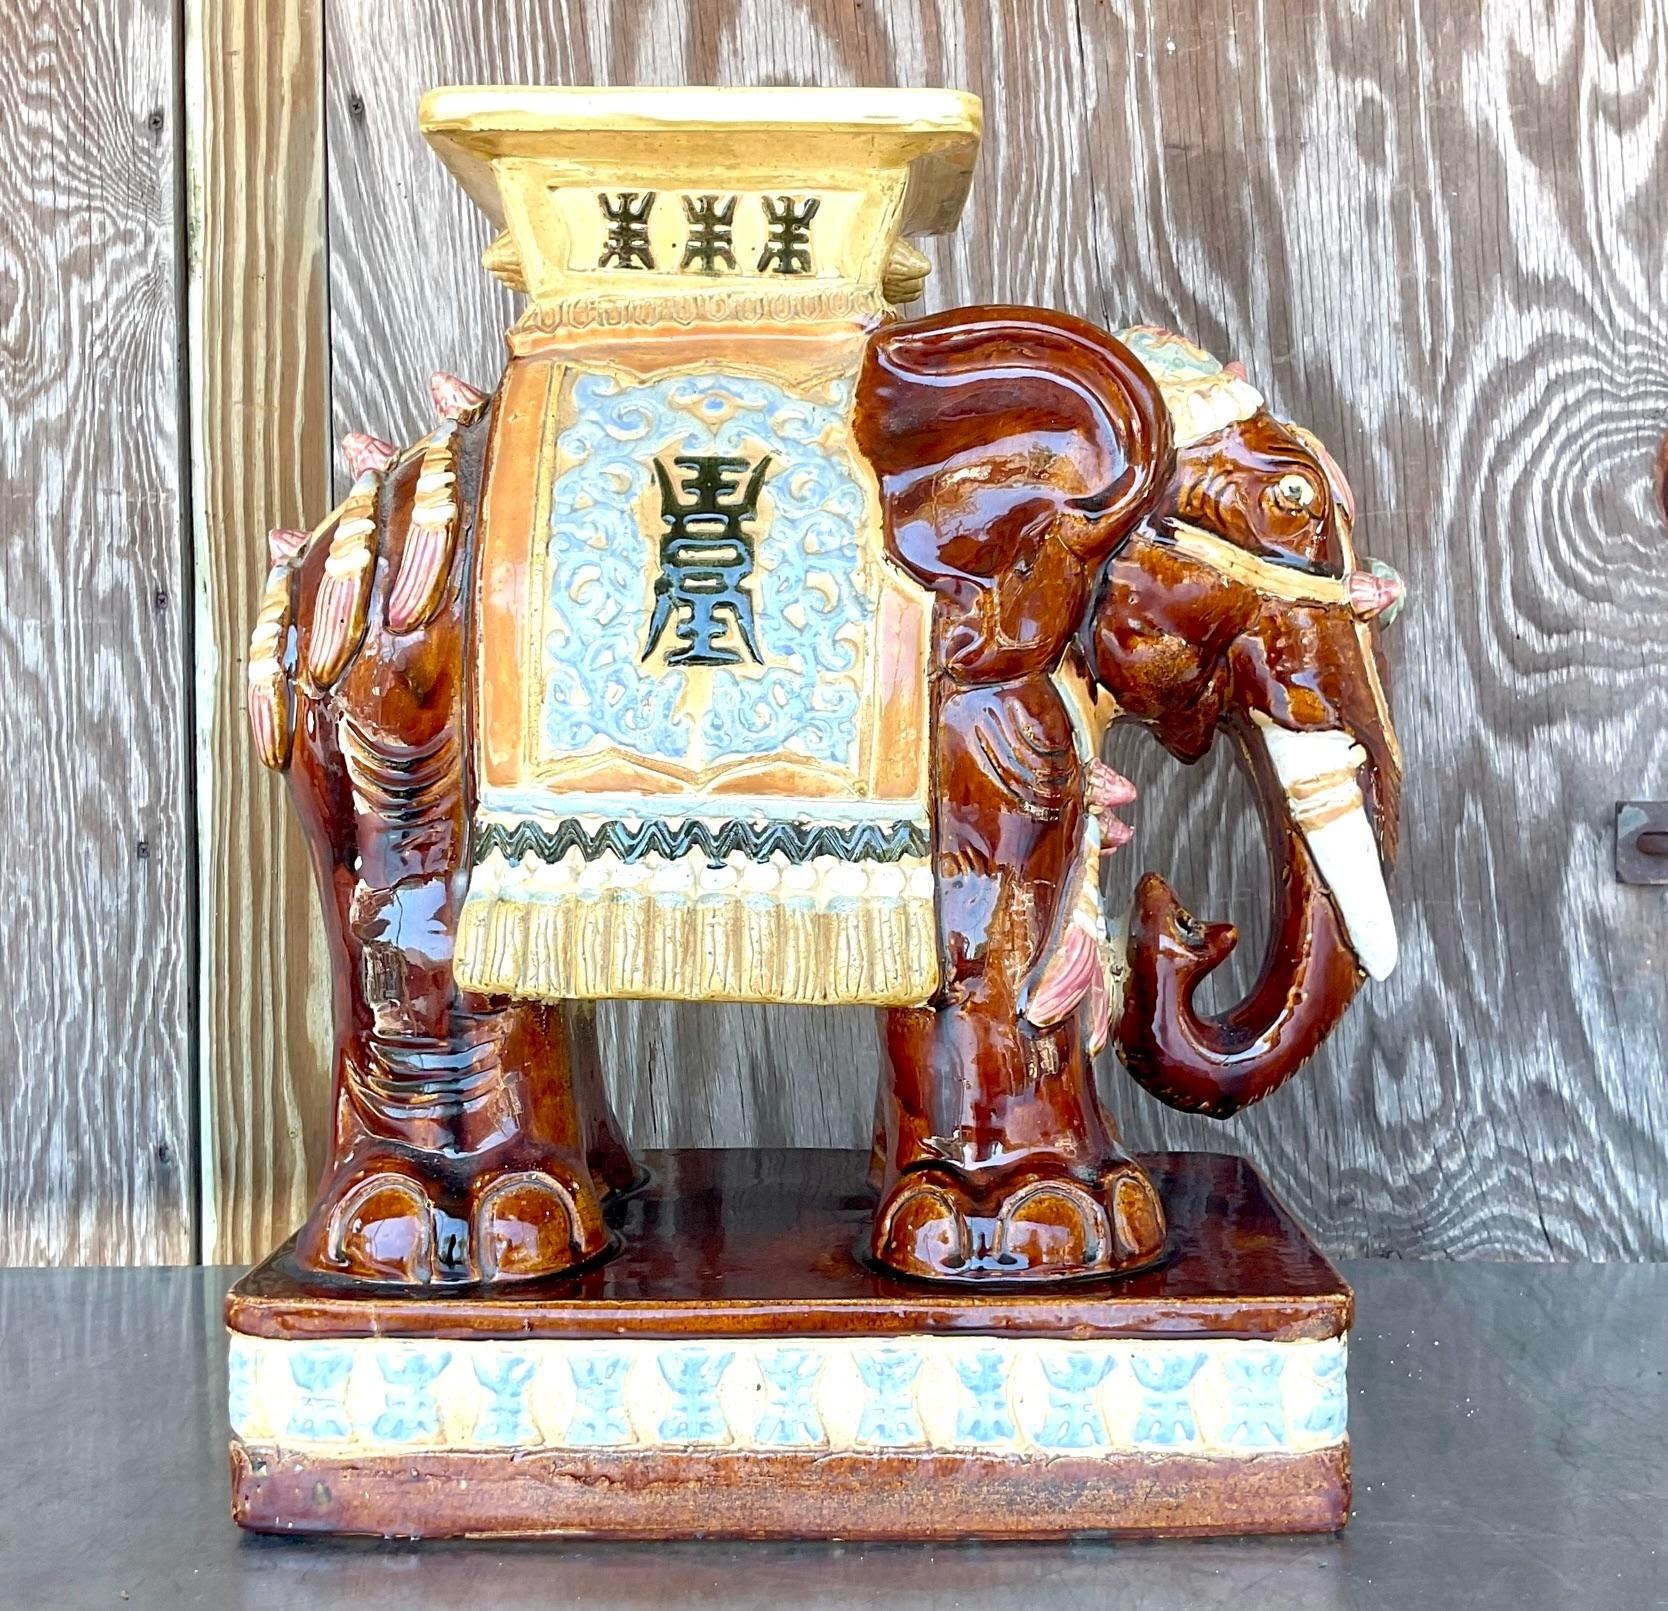 A fabulous vintage Boho elephant stool. A chic hand painted ceramic with a high gloss finish. Perfect indoors or out. Acquired from a Palm Beach estate.